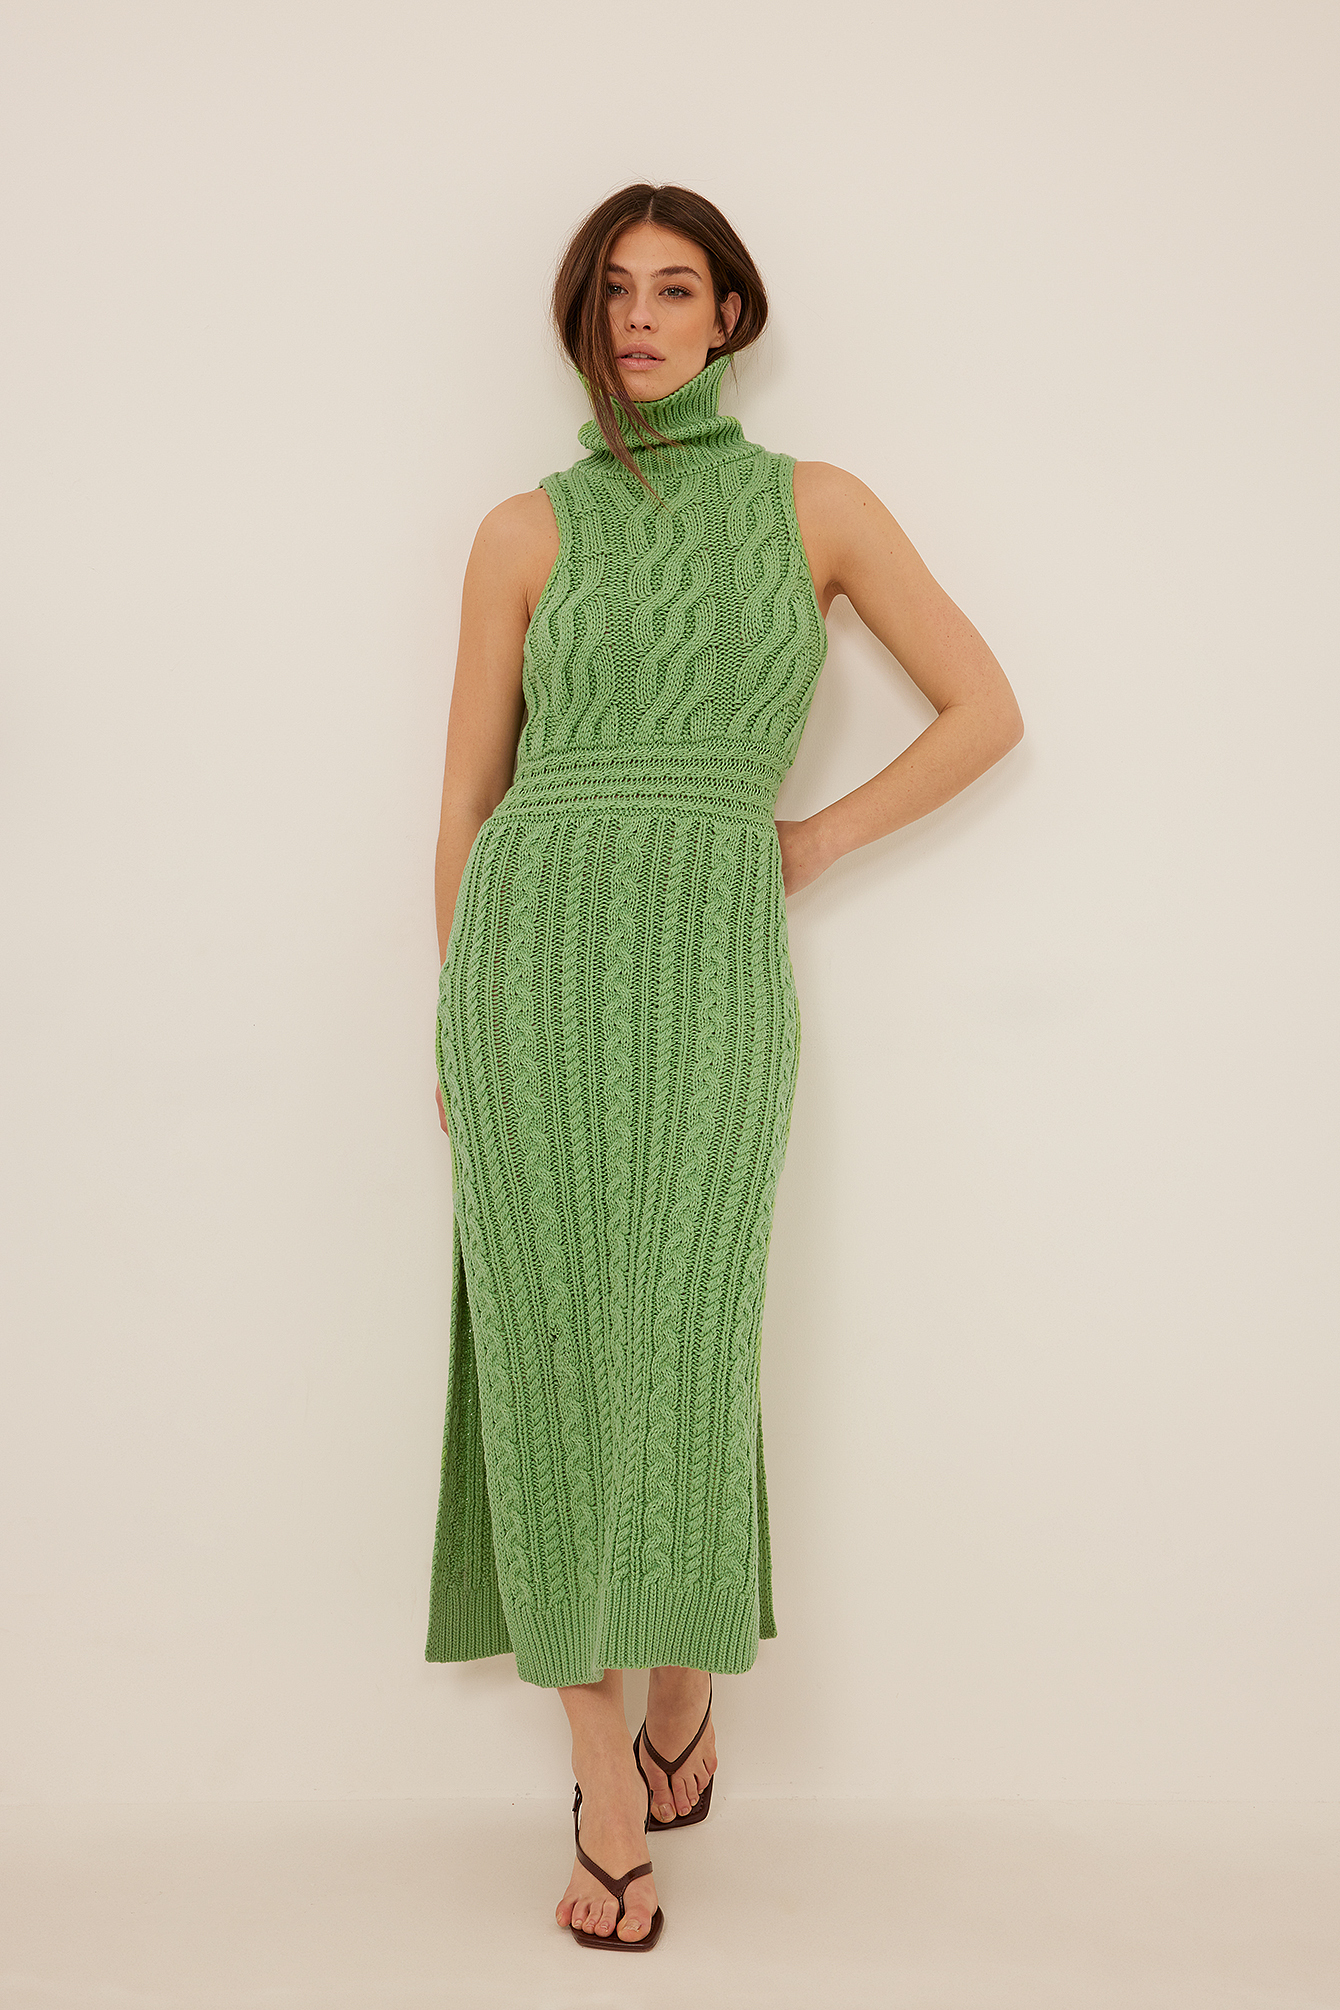 Cable Knitted Long High Neck Dress Outfit.